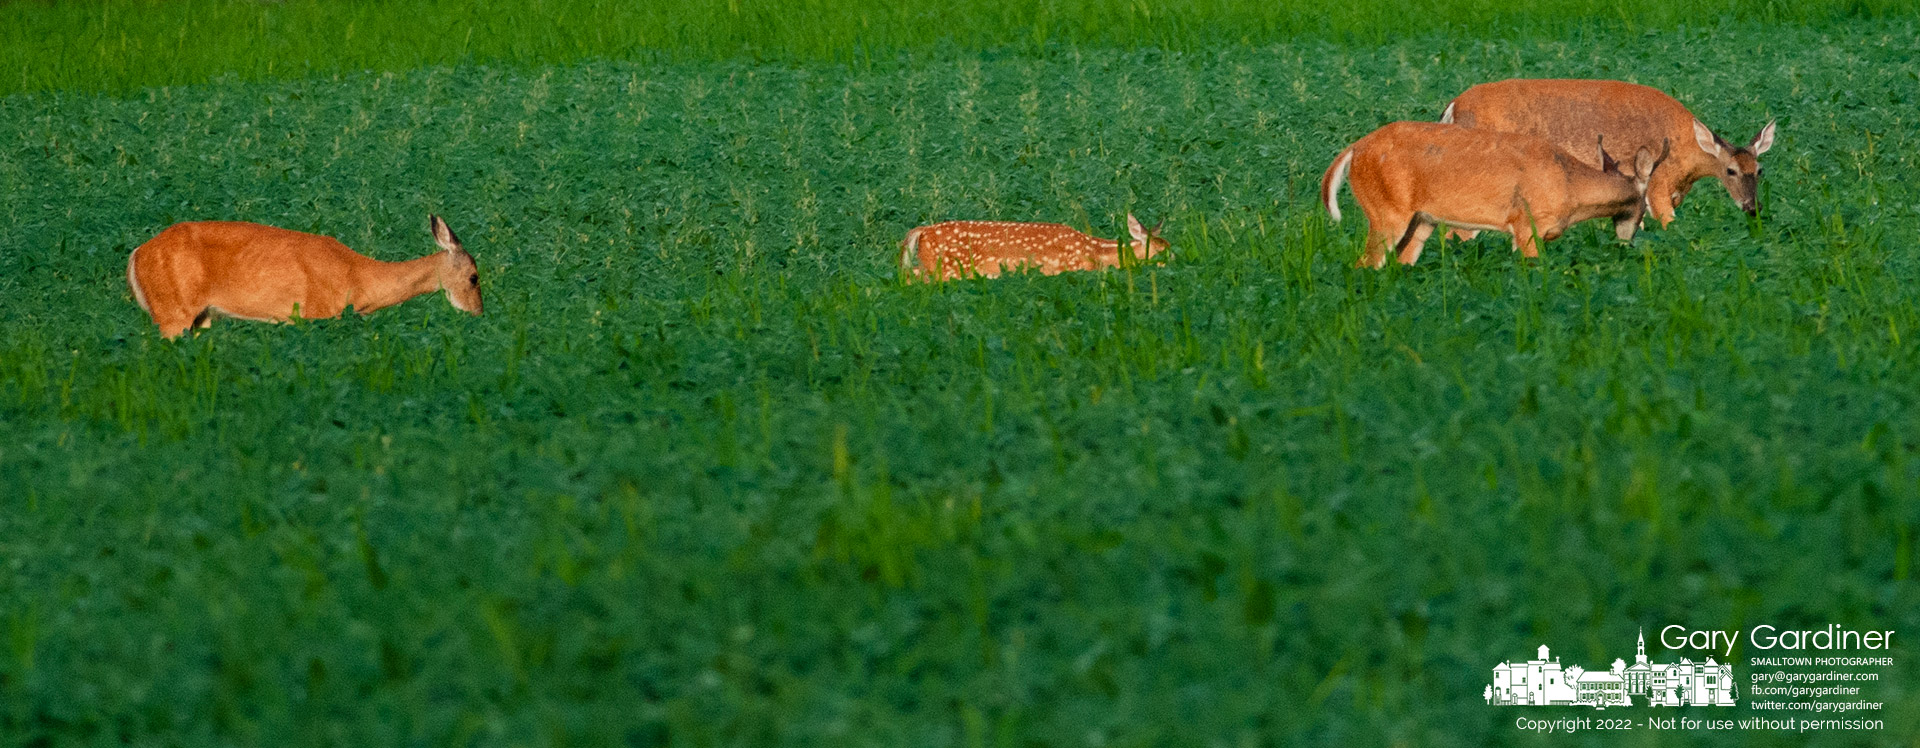 A fawn nudges her way through soybeans following the lead of her older family members as they move through the fields on the Yarnell Farm. My Final Photo for August 7, 2022.